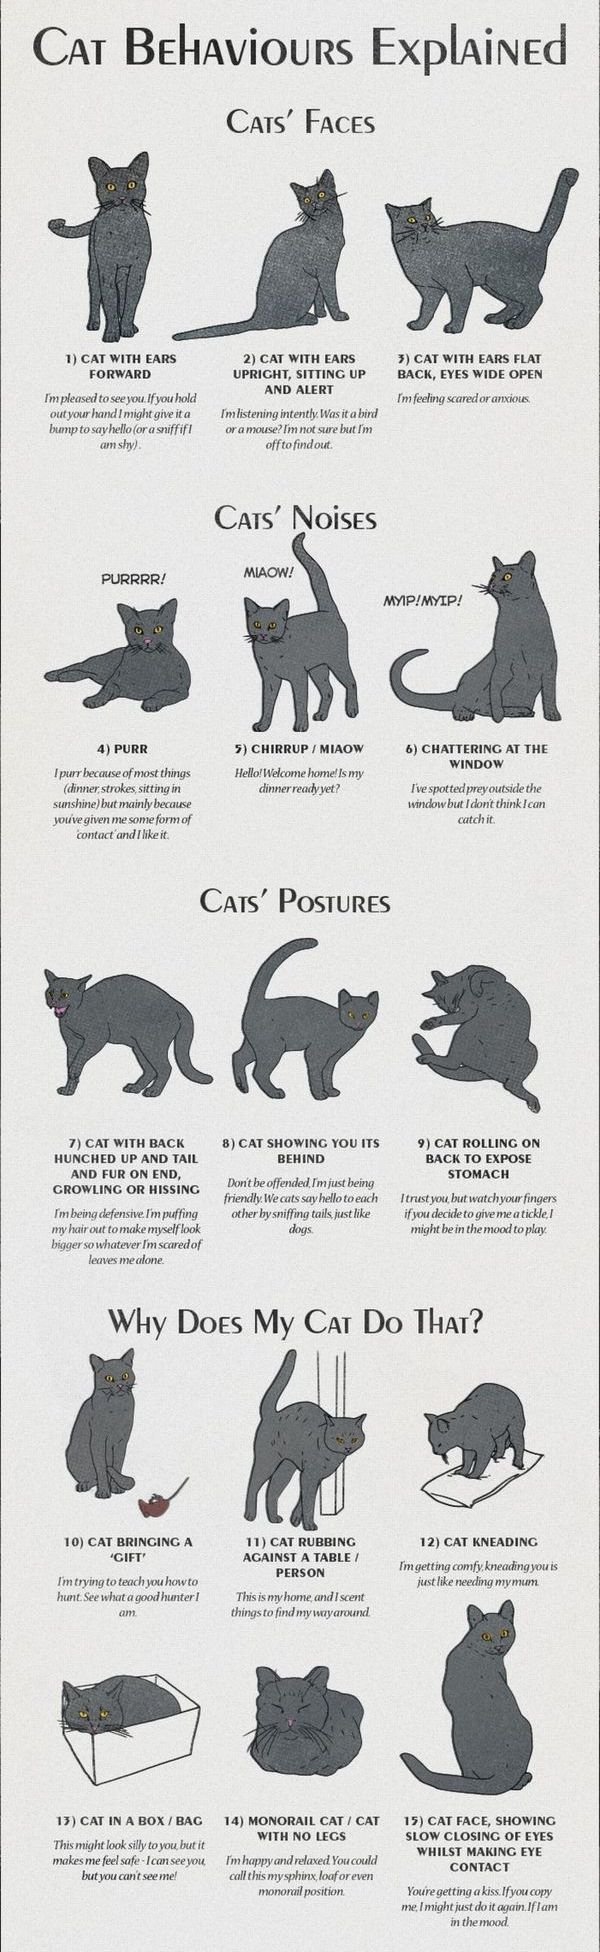 Cat Behaviours Explained Cats' Faces 1 Cat With Ears Forward I'm pleased to see you. If you hold out your hand I might give it a bump to say hello or a sniff if i am shy 2 Cat With Ears Upright, Sitting Up And Alert I'm listening intently Was i